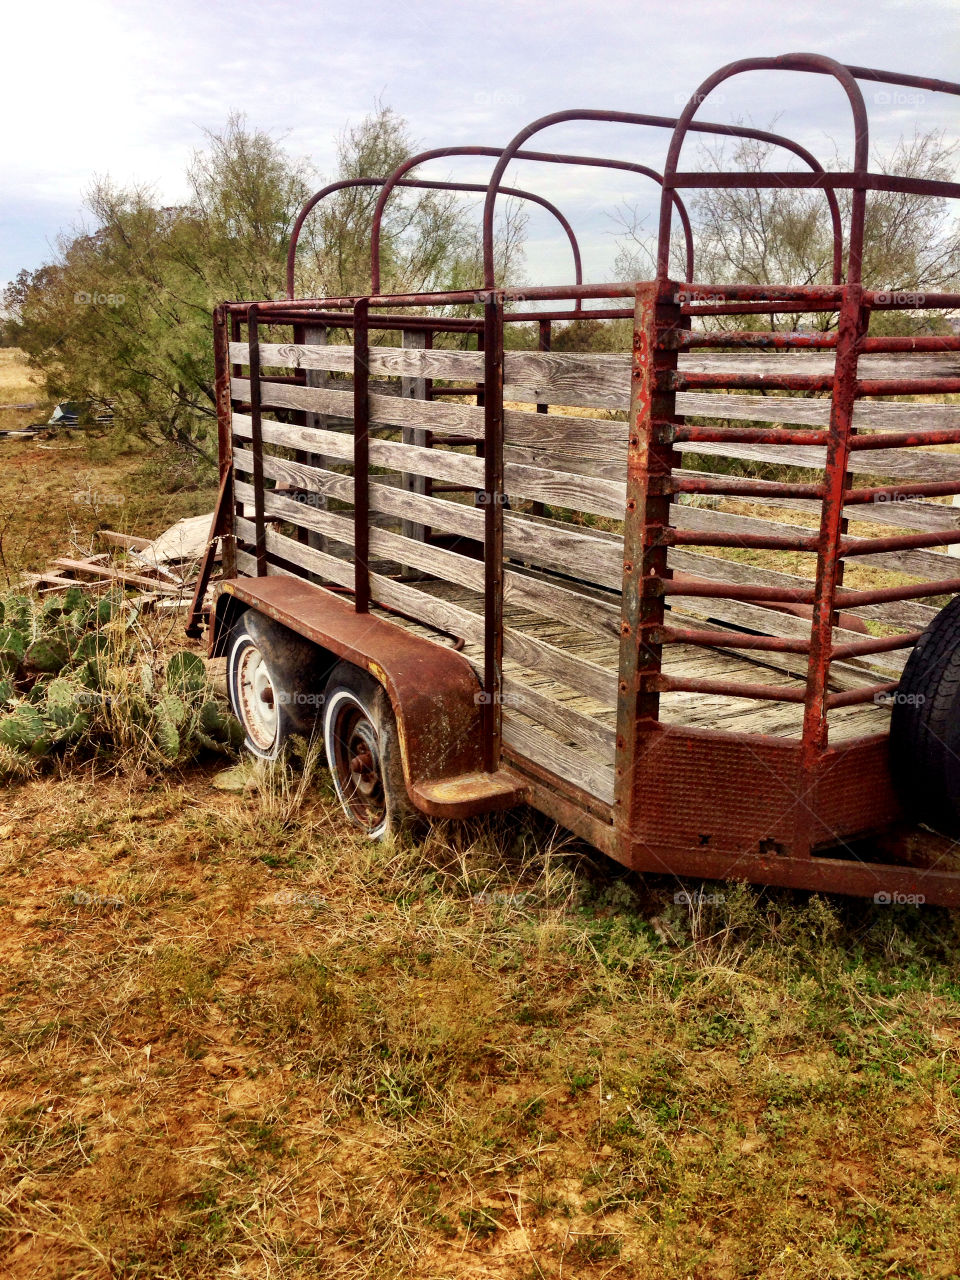 Trailer and Cactus on Texas Ranch